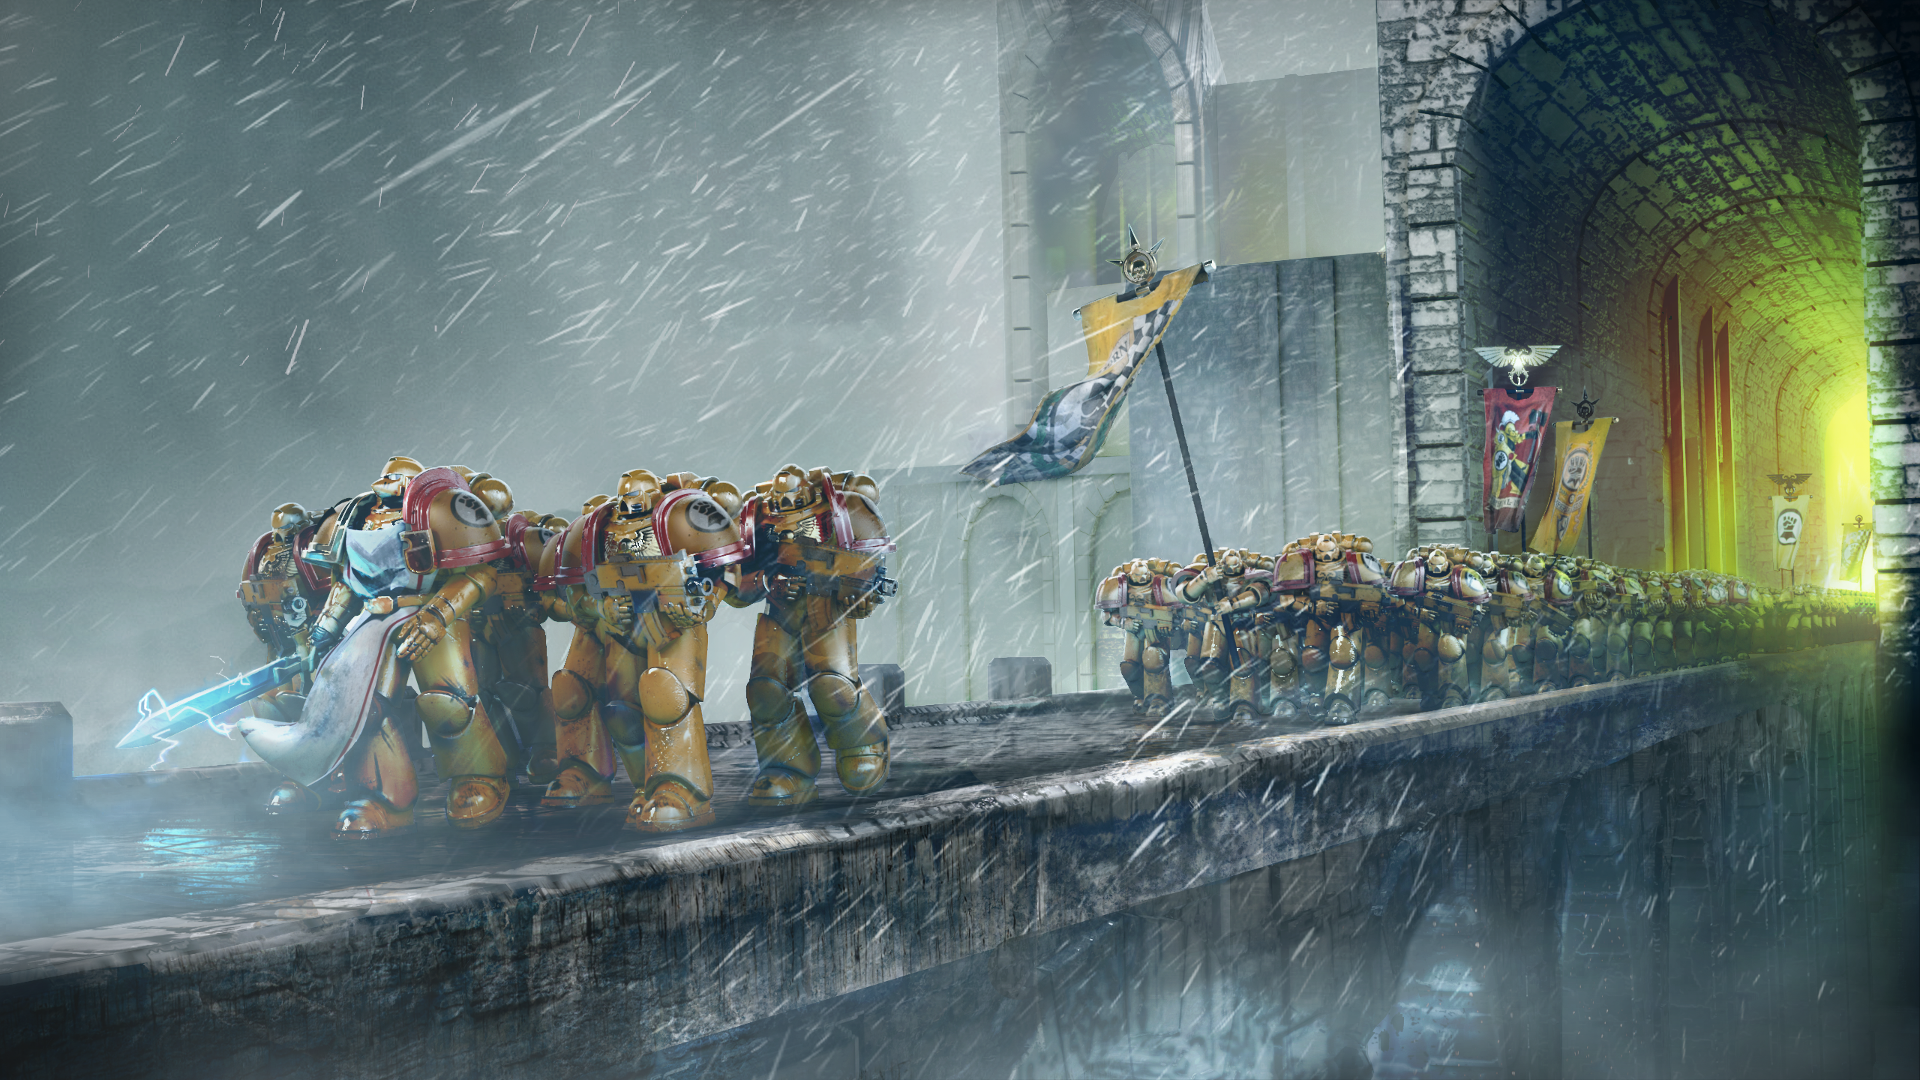 General 1920x1080 Warhammer 40,000 Imperial Fists armor rain flag sword weapon soldier video game art